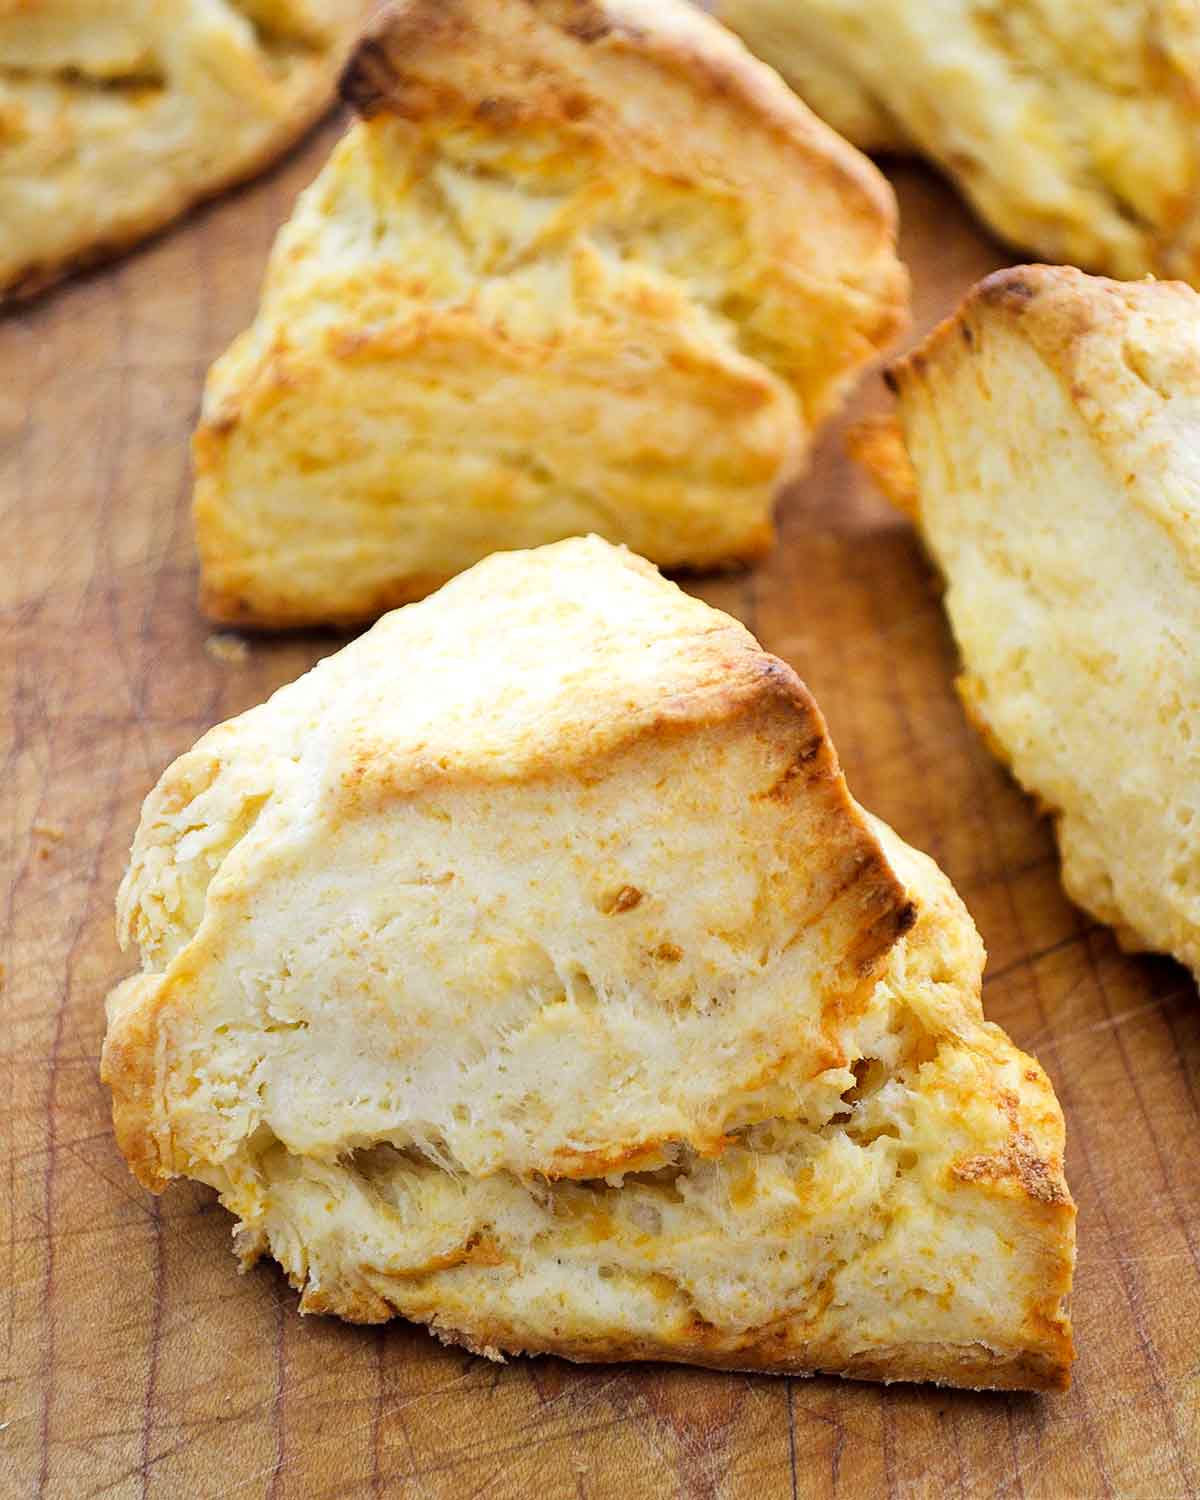 Five irregular shaped cheddar biscuits with golden edges, on a wooden cutting board.